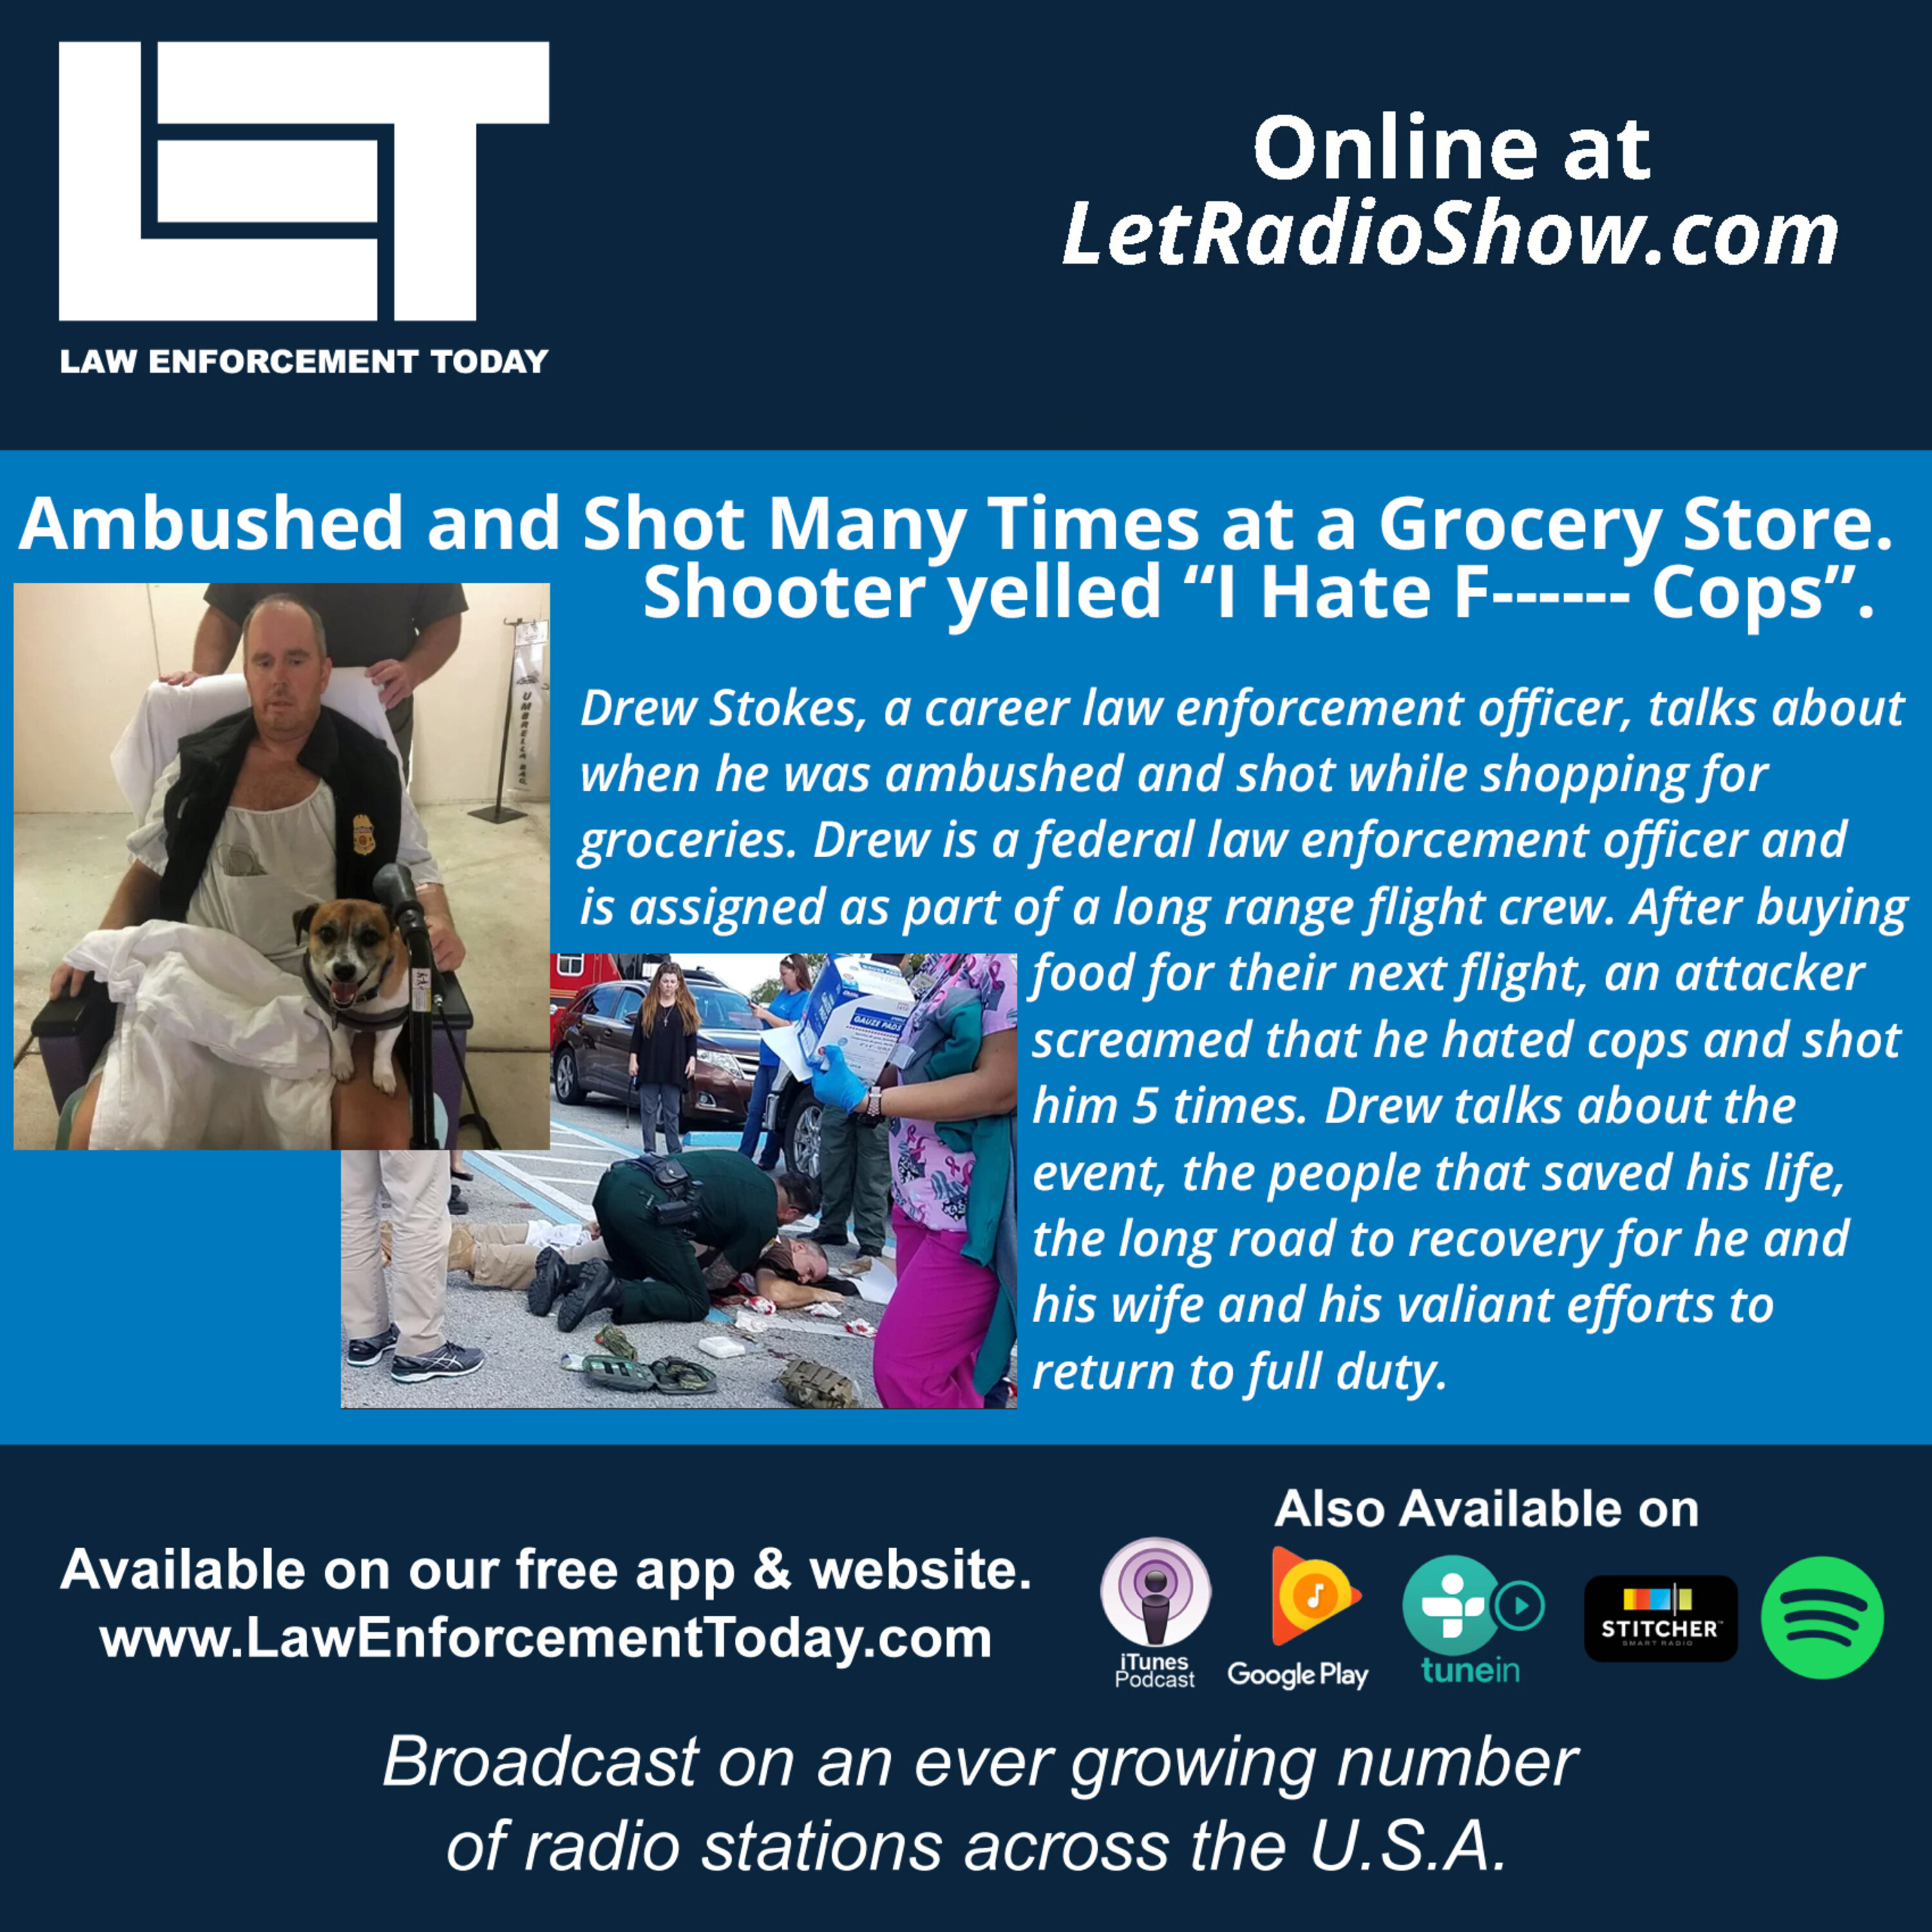 S6E23: Ambushed and Shot Many Times at a Grocery Store. Shooter yelled "I hate f------ Cops".  Special Episode of the Law Enforcement Today Radio Show and Podcast.